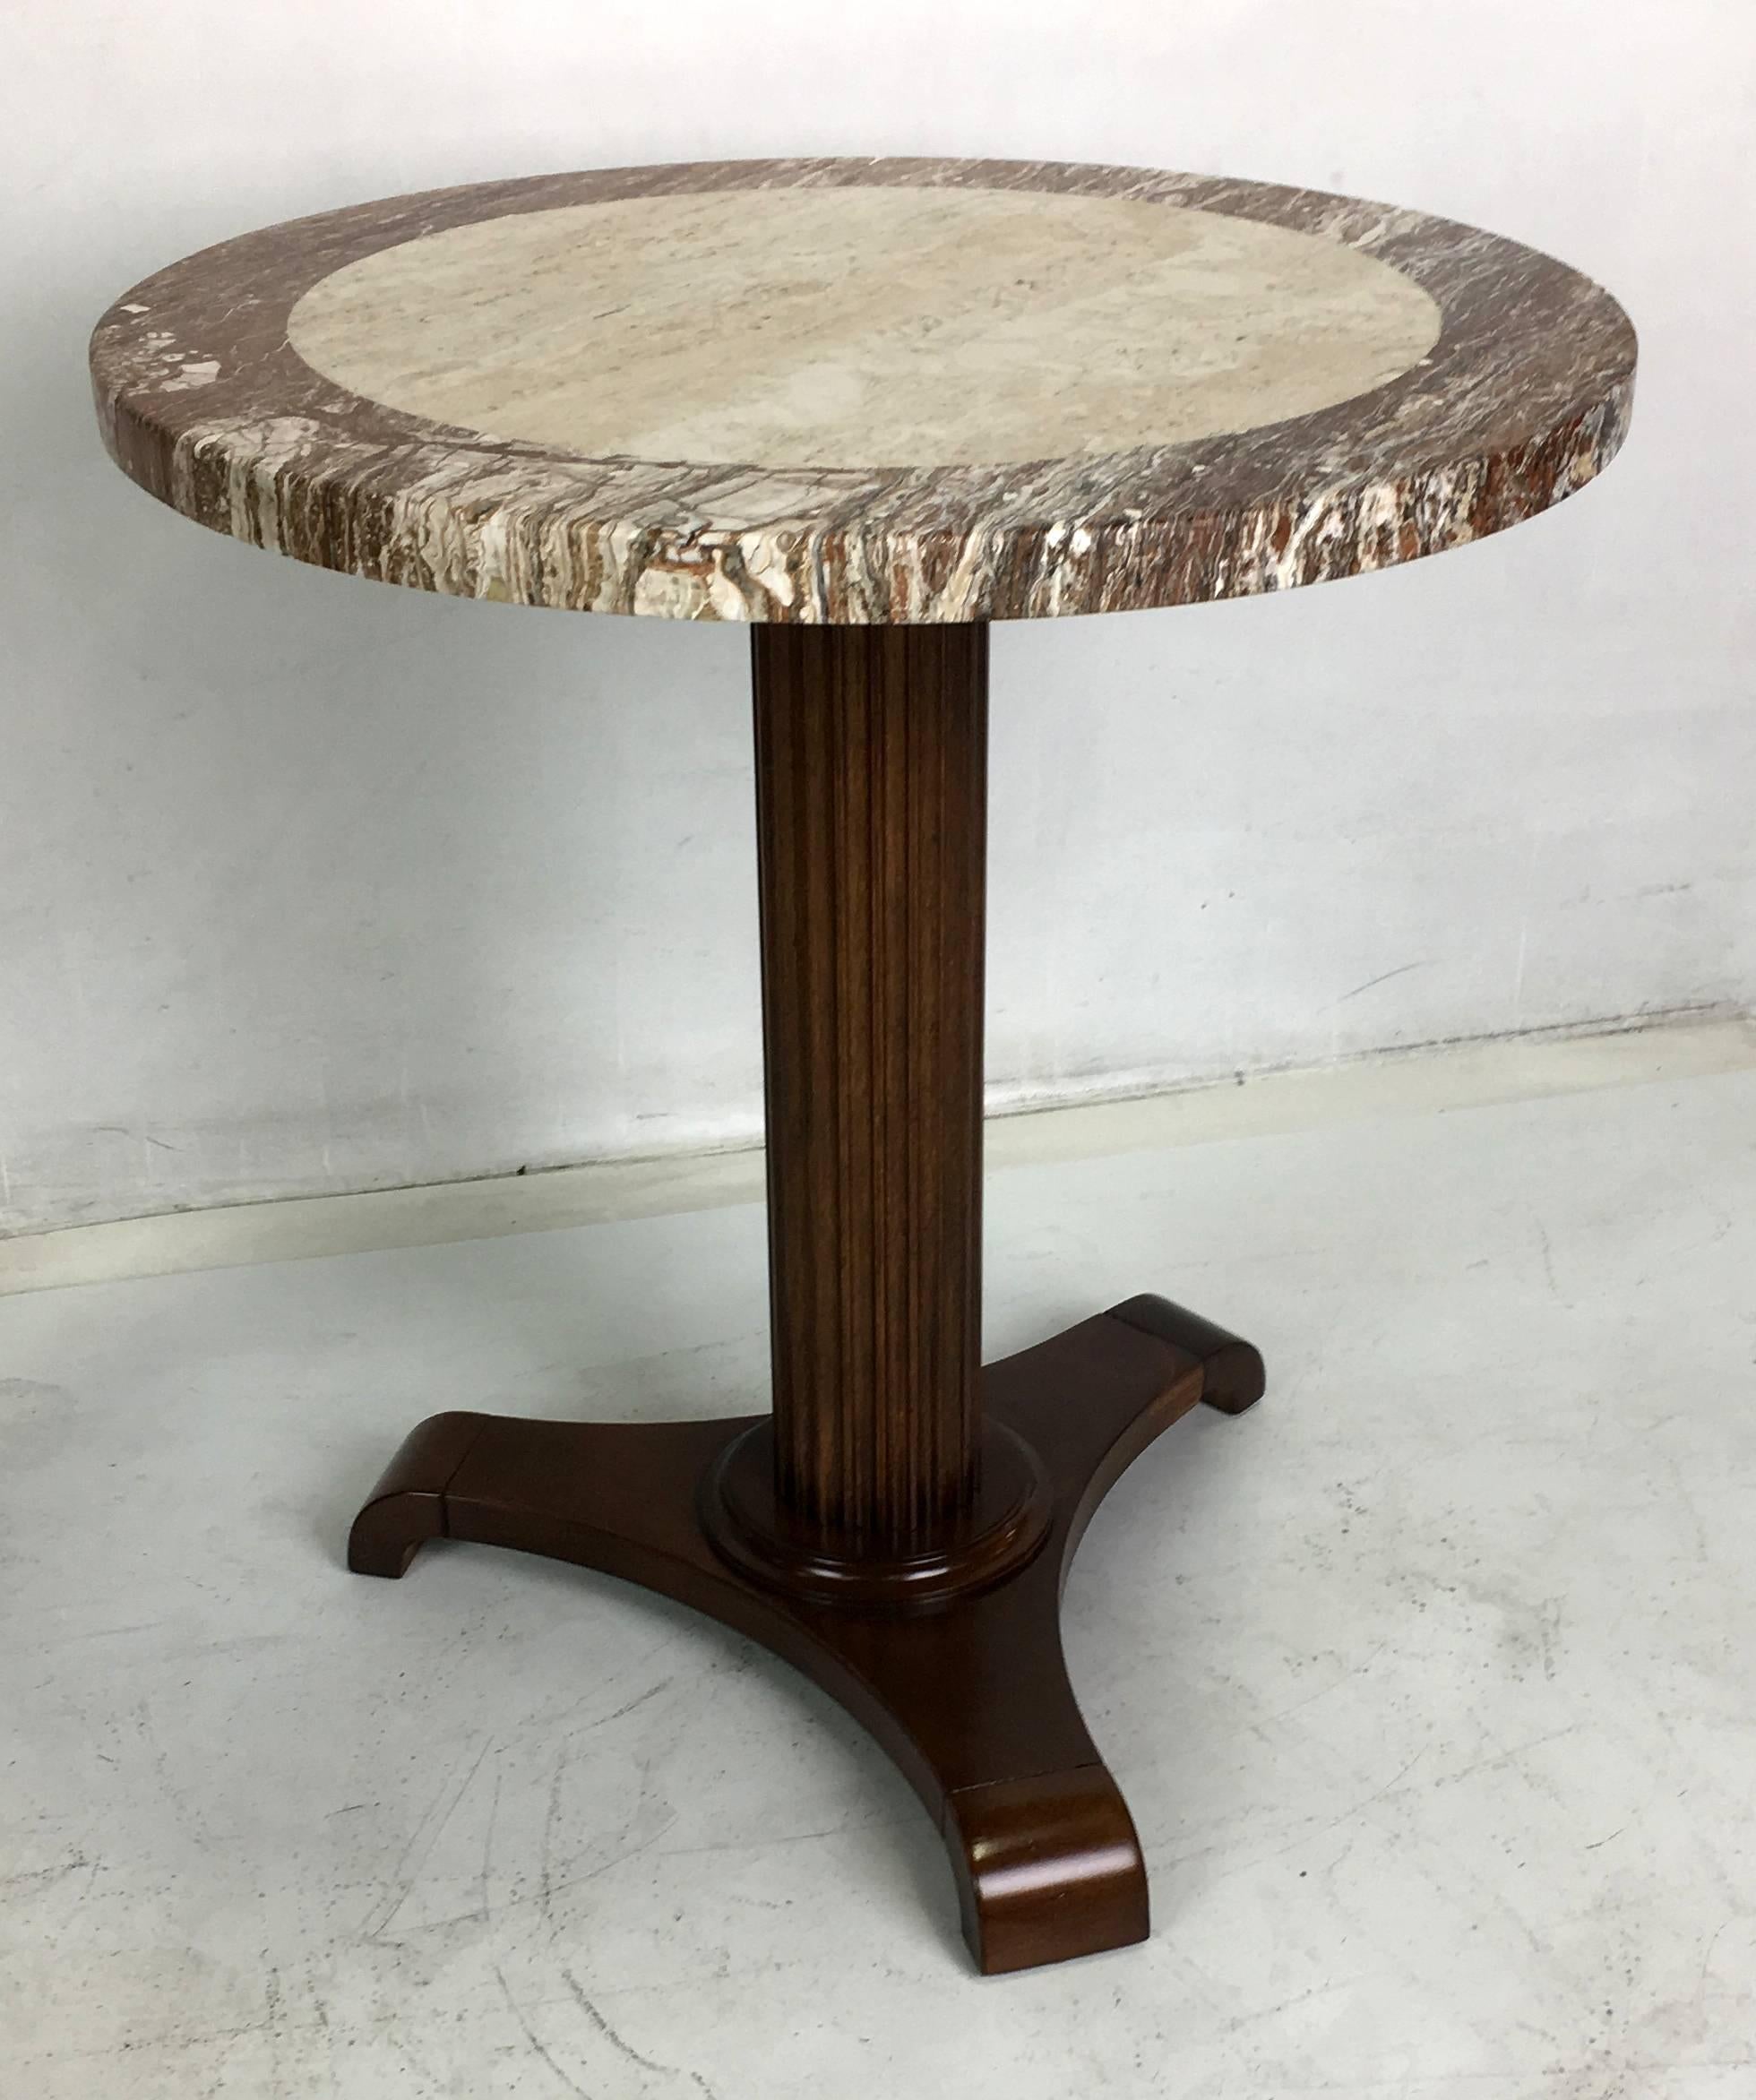 Lovely walnut gueridon with a fluted column neck on a tripartite base with scrolling feet supporting an Italian marble top.  All work done with painstaking quality at our in-house workroom.  